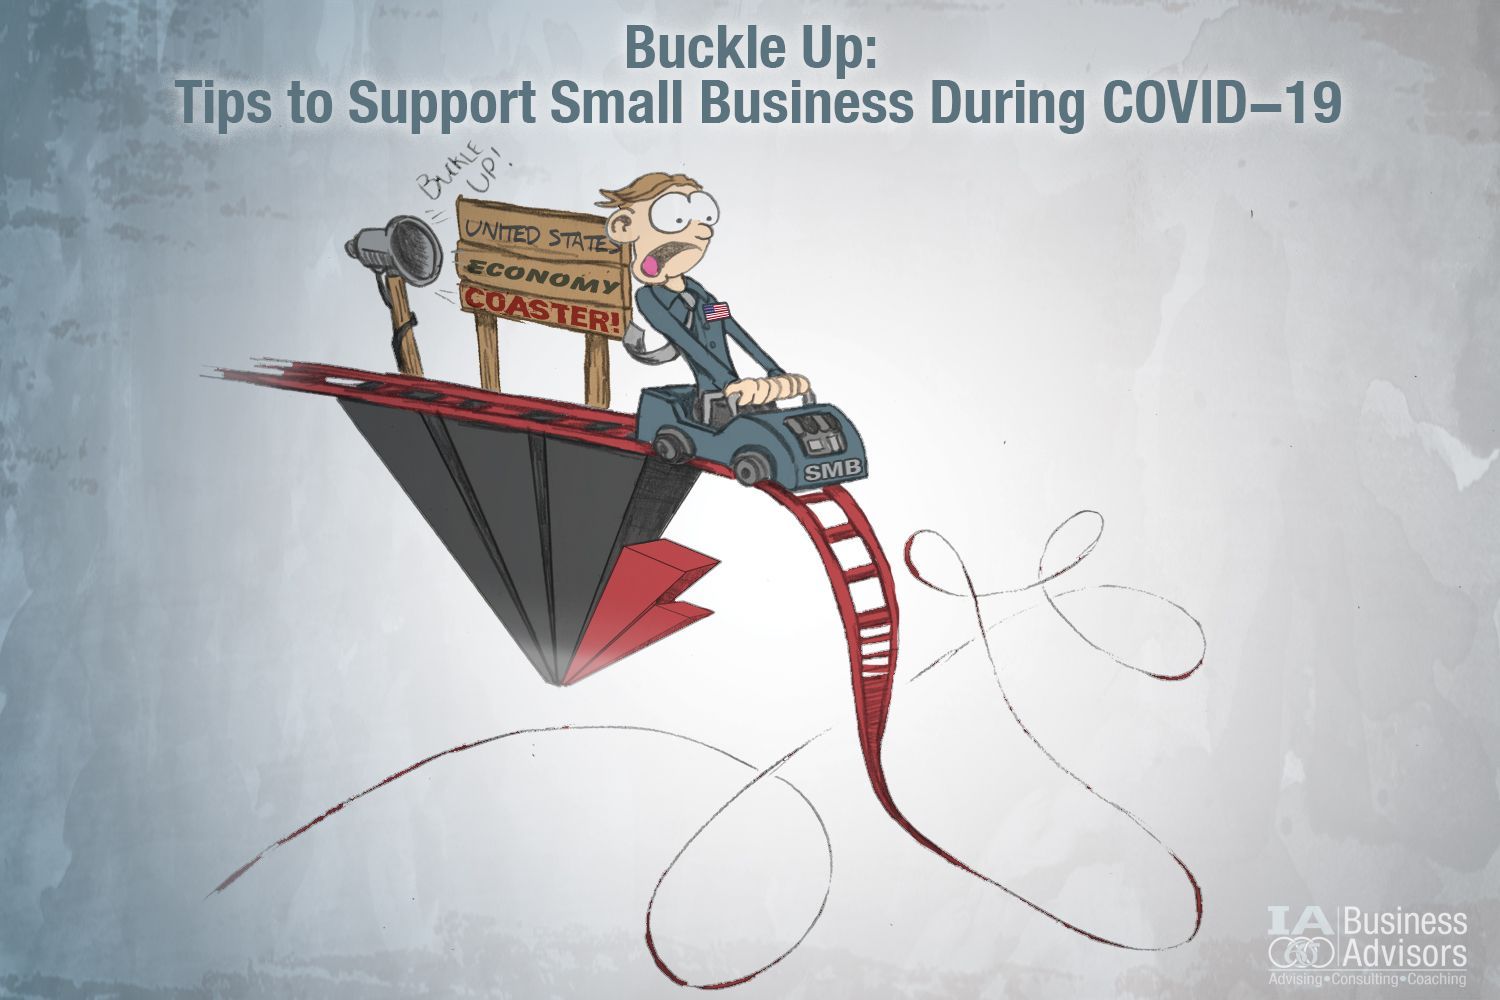 Buckle Up: Tips to Support Small Business During COVID-19